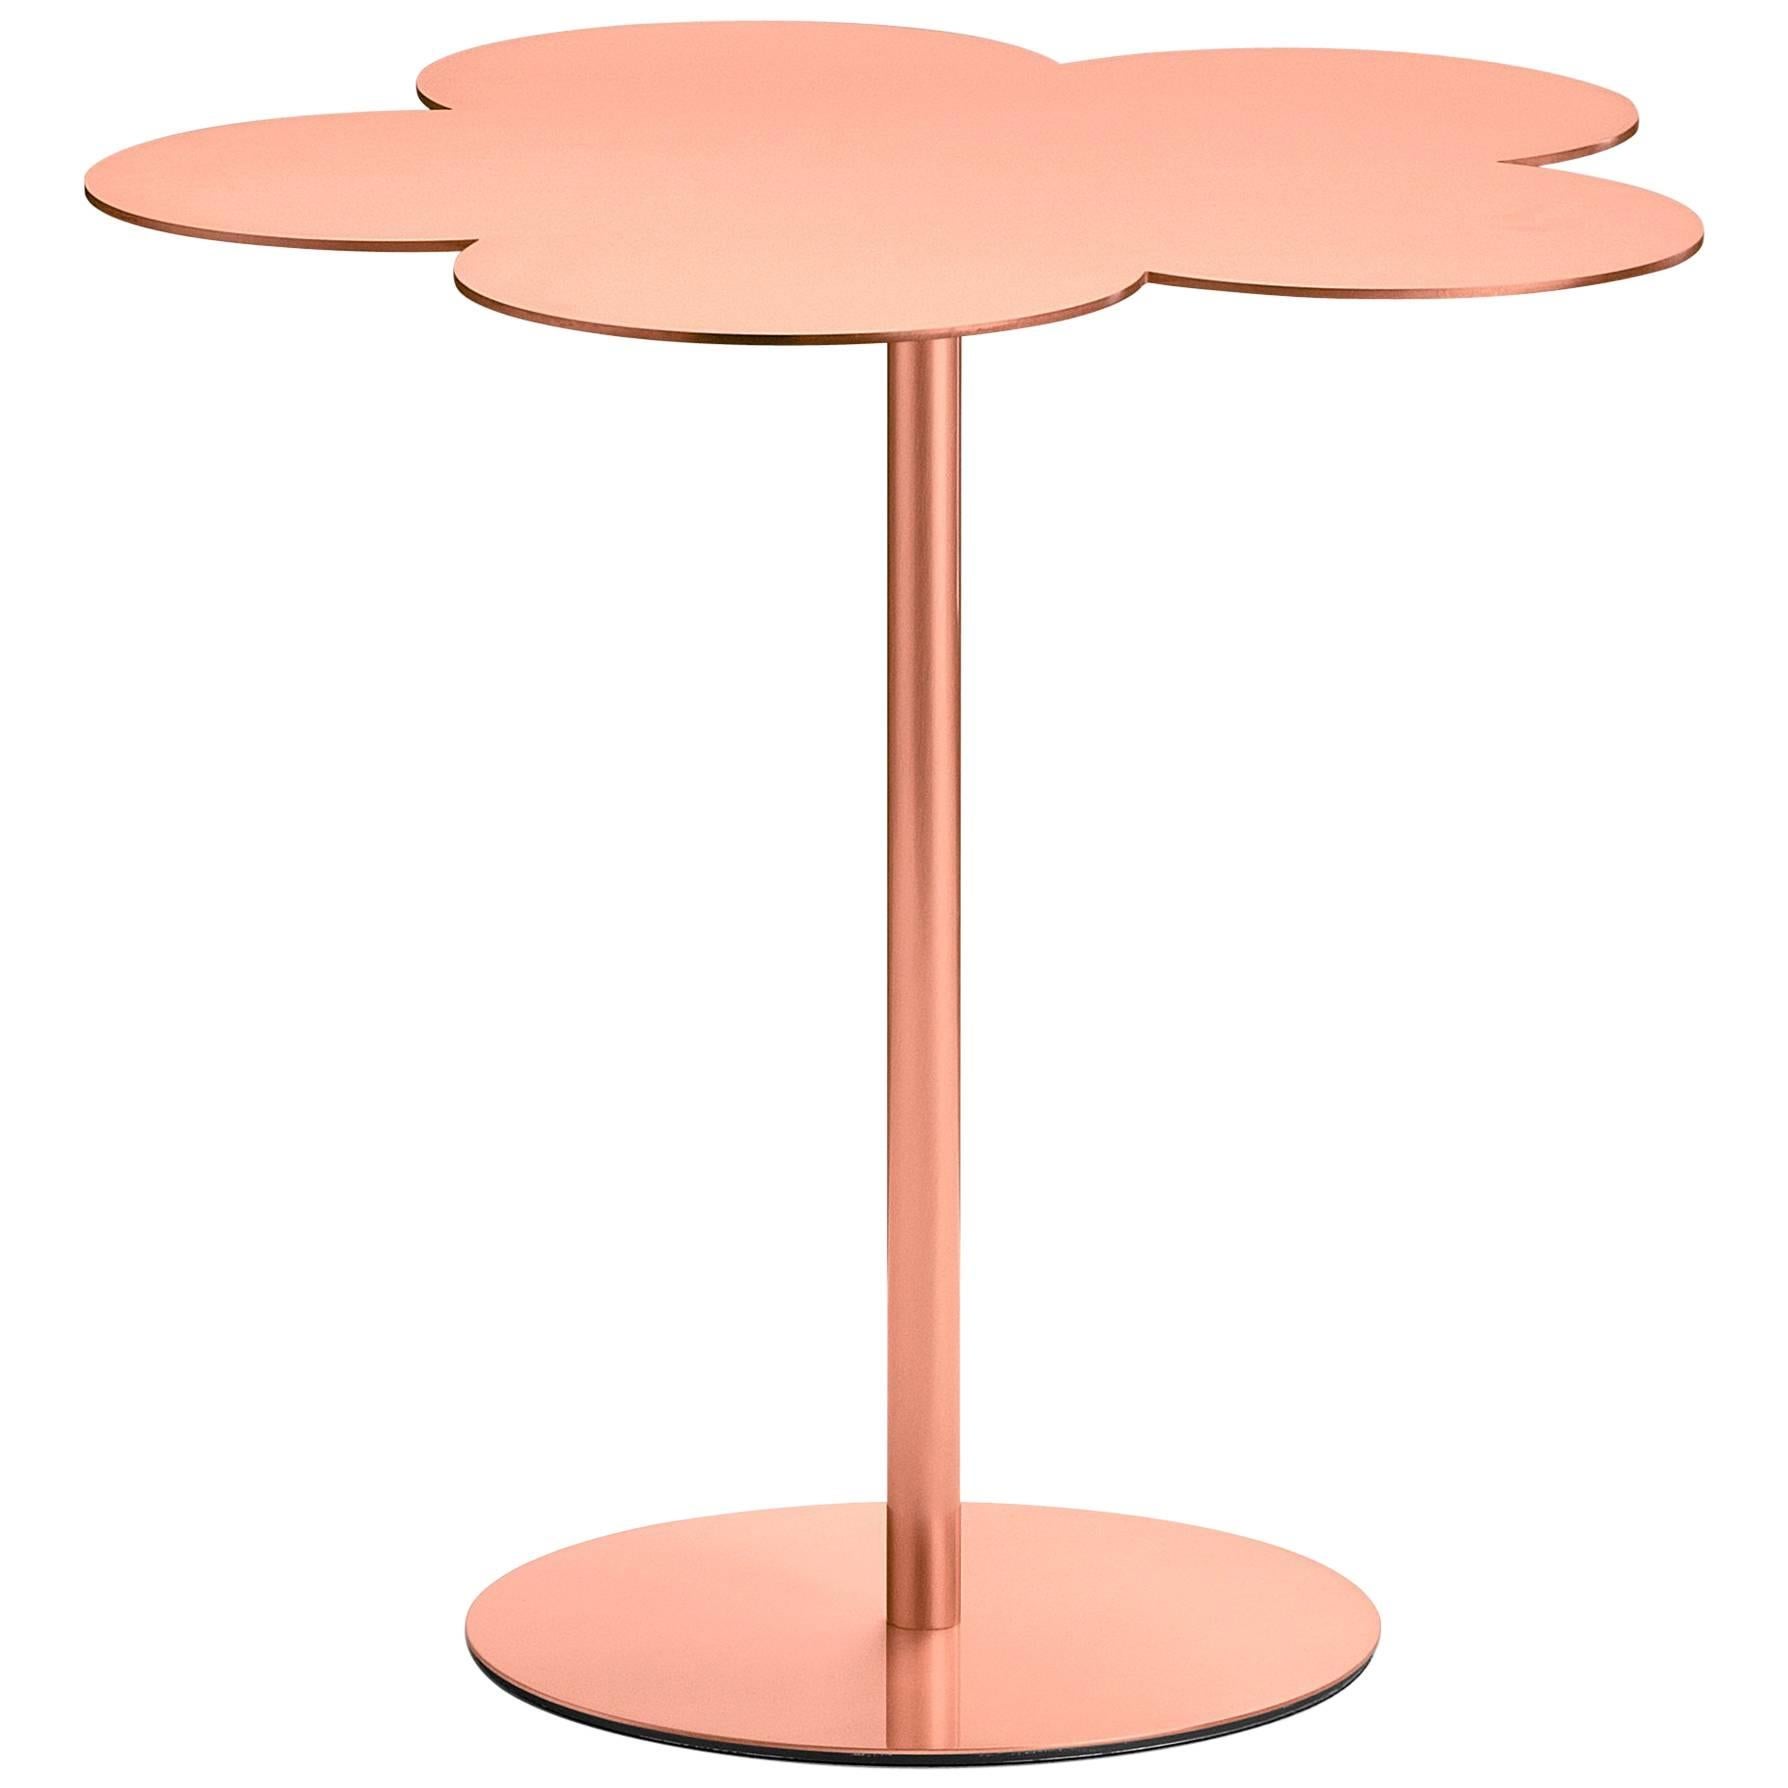 Ghidini 1961 Flowers Large Side Coffee Table in Rose Gold Finish